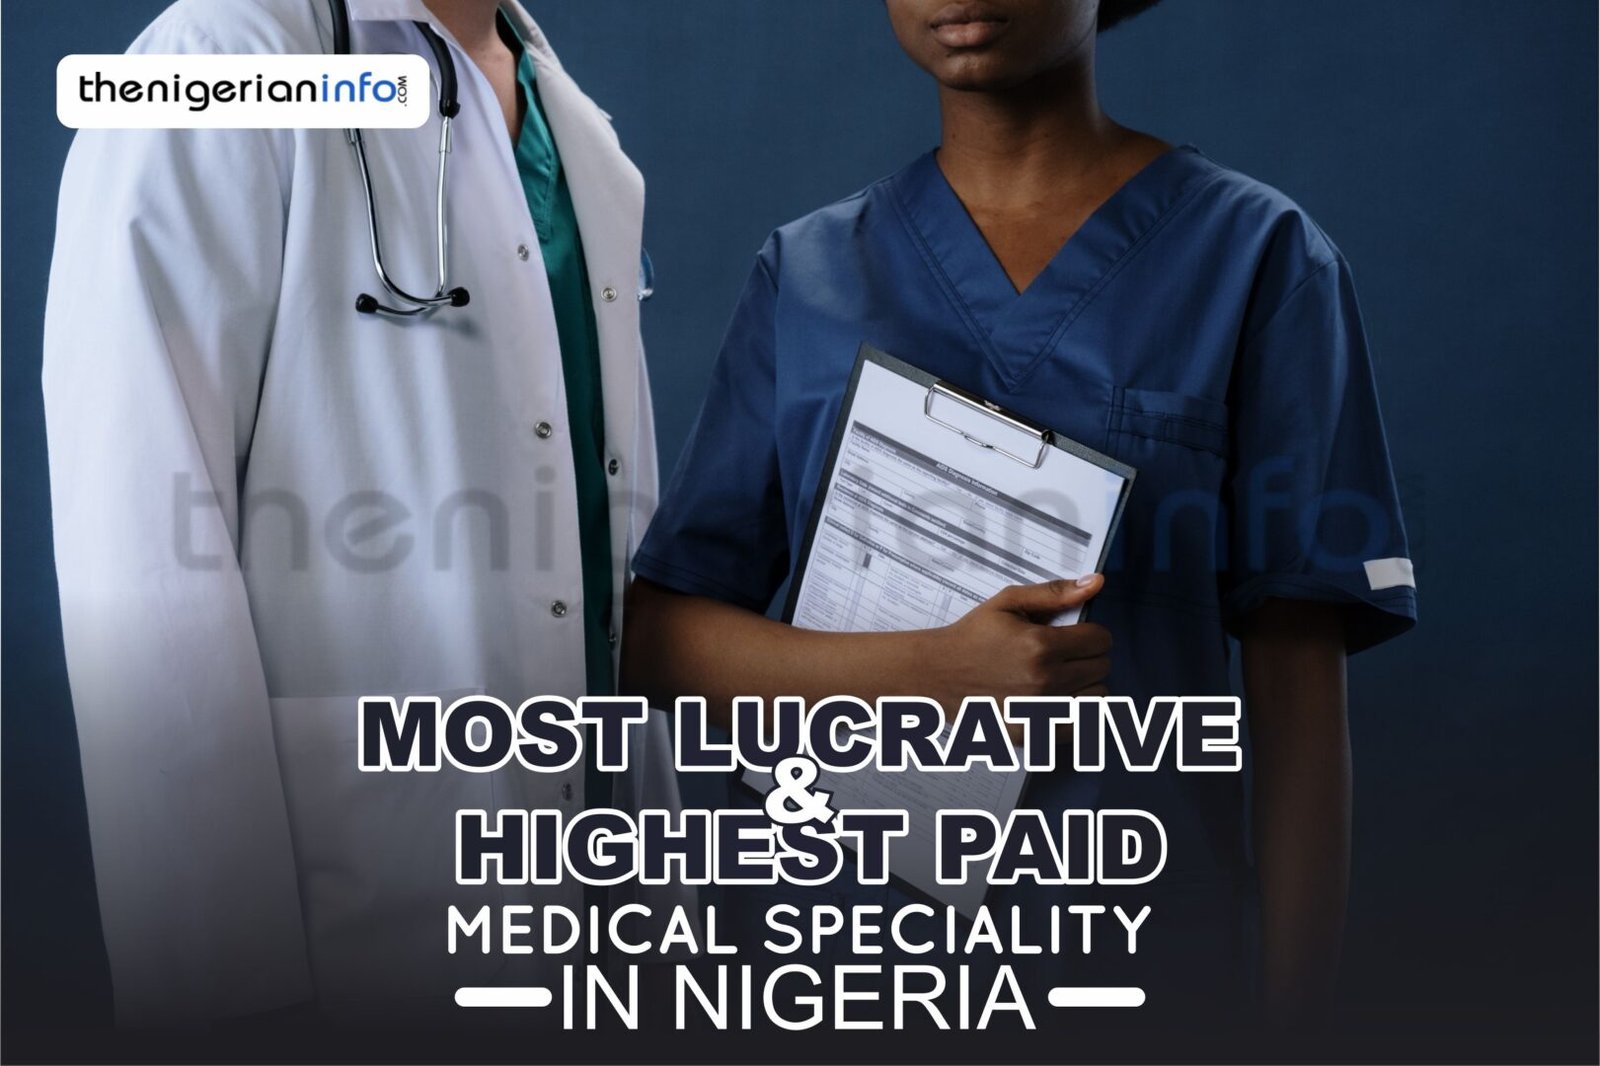 Most Lucrative & Highest Paid Medical Specialty In Nigeria